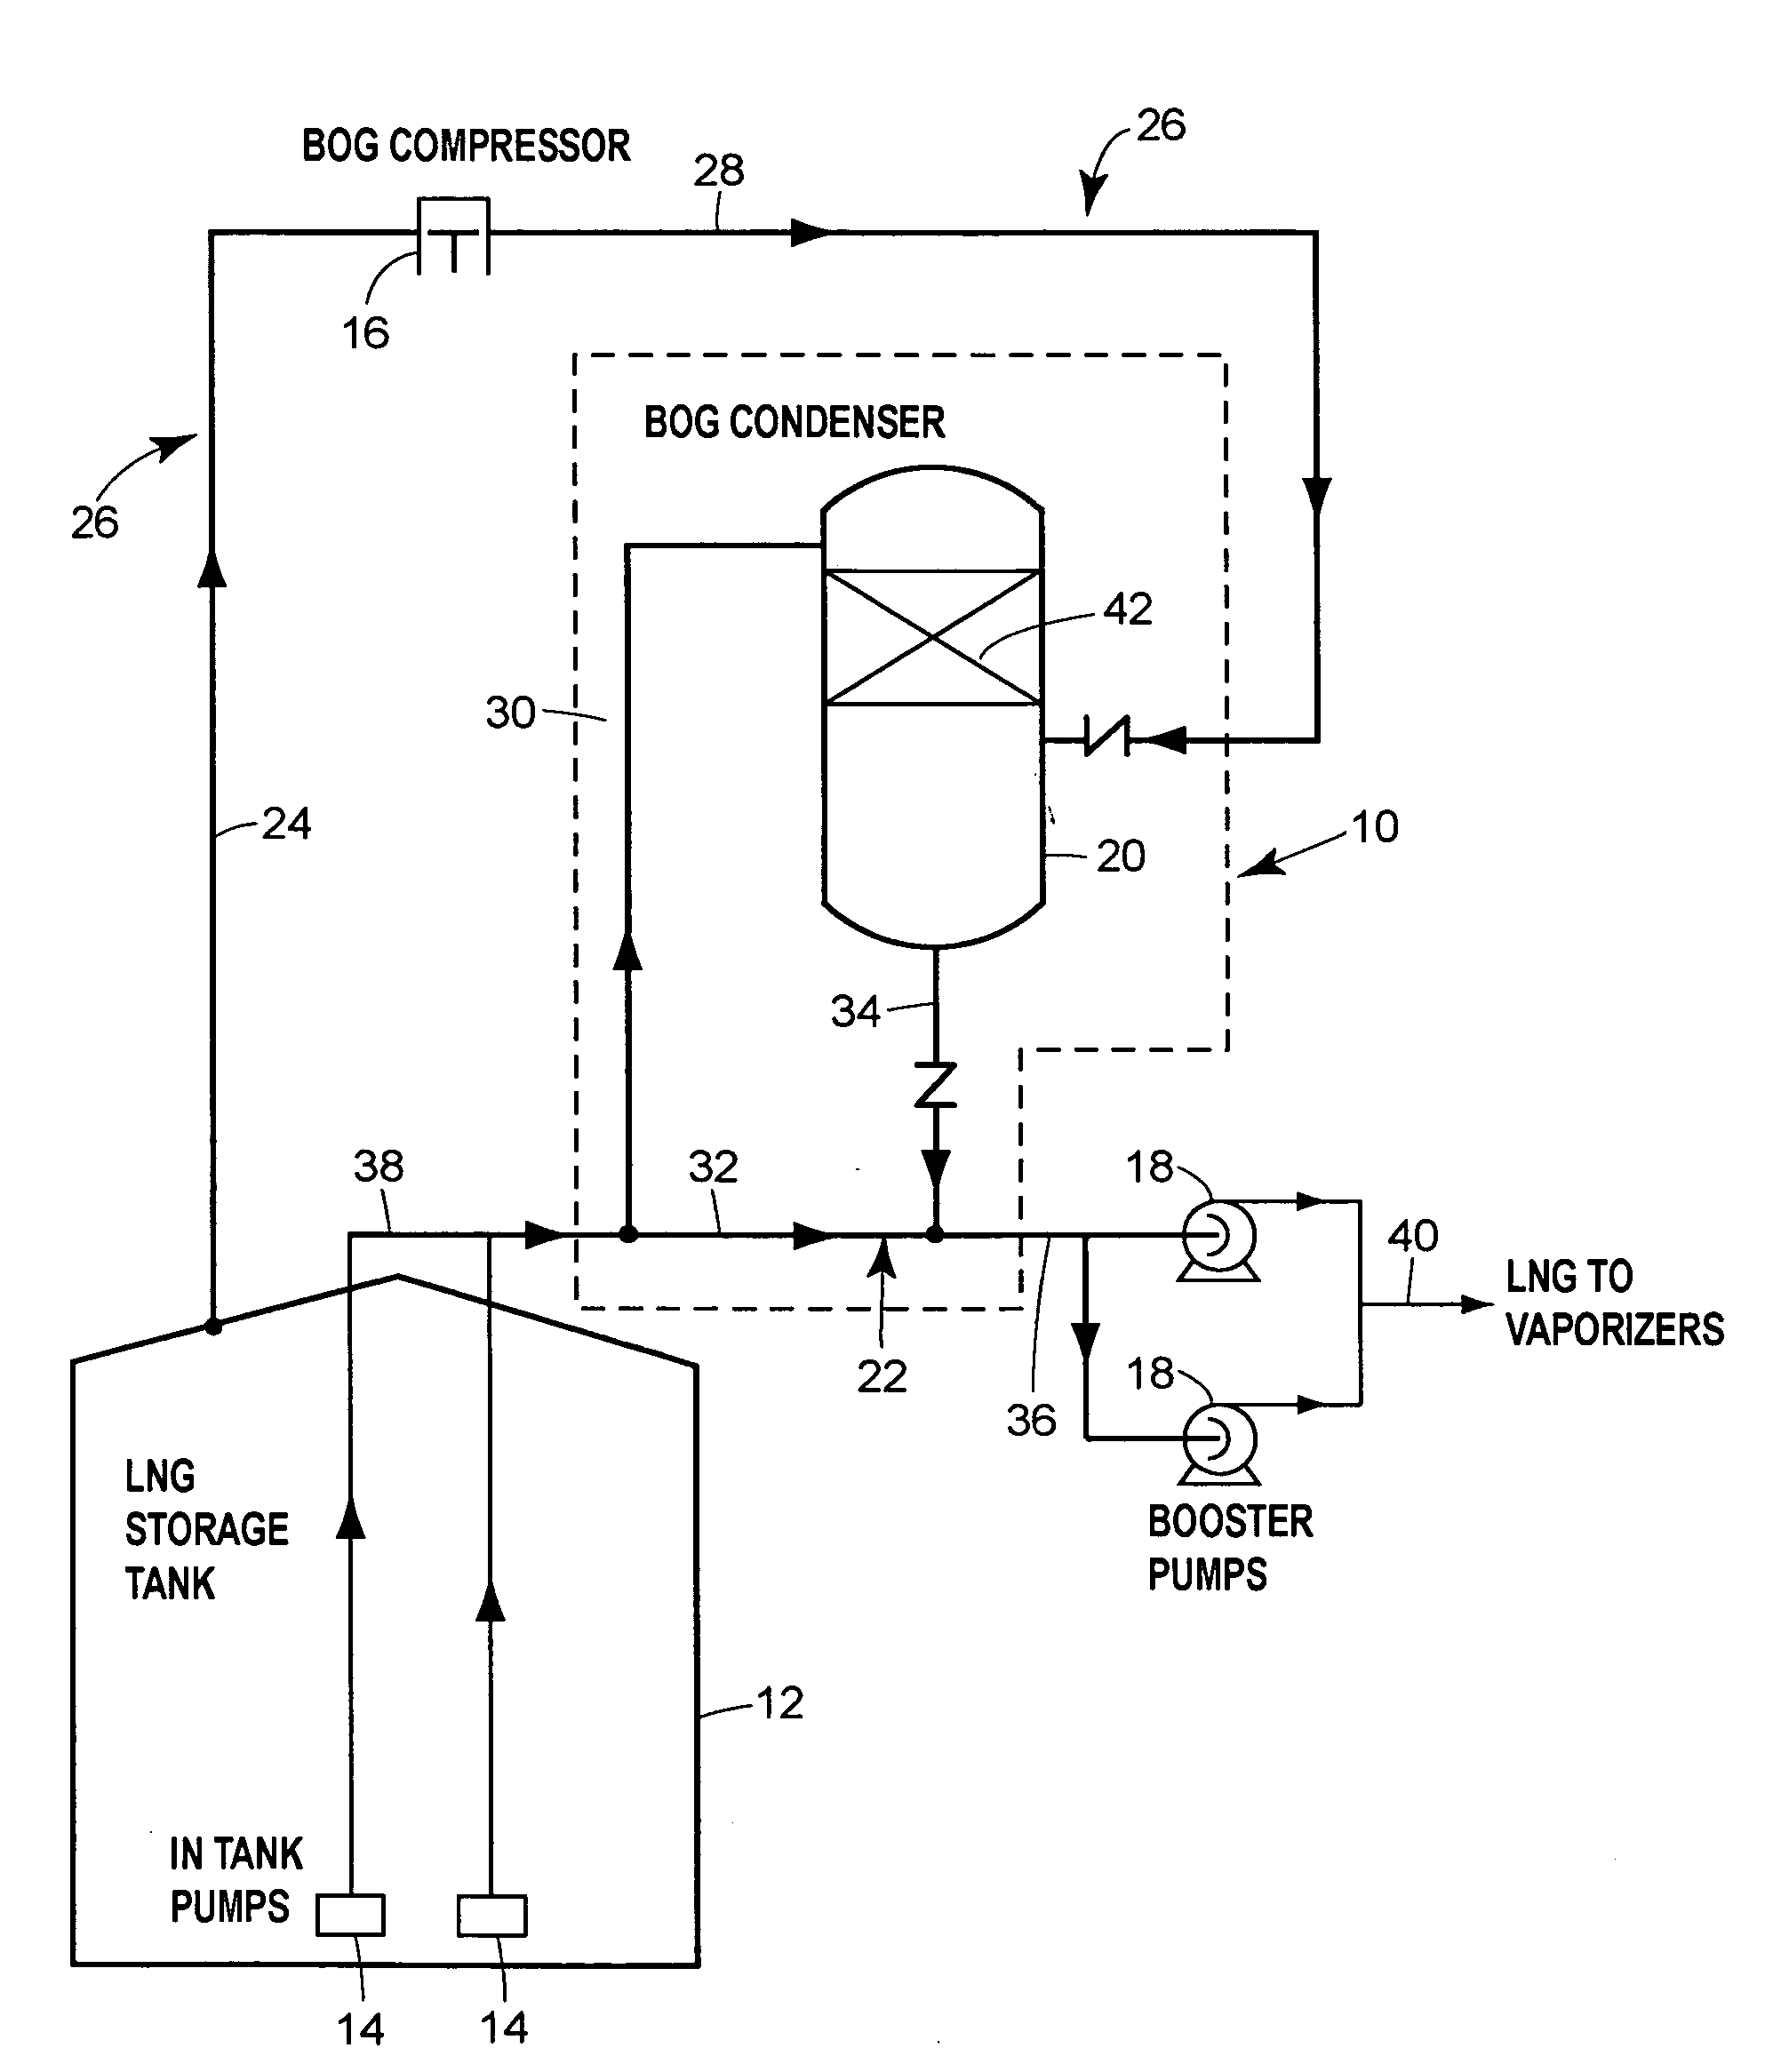 Boil-off gas condensing assembly for use with liquid storage tanks